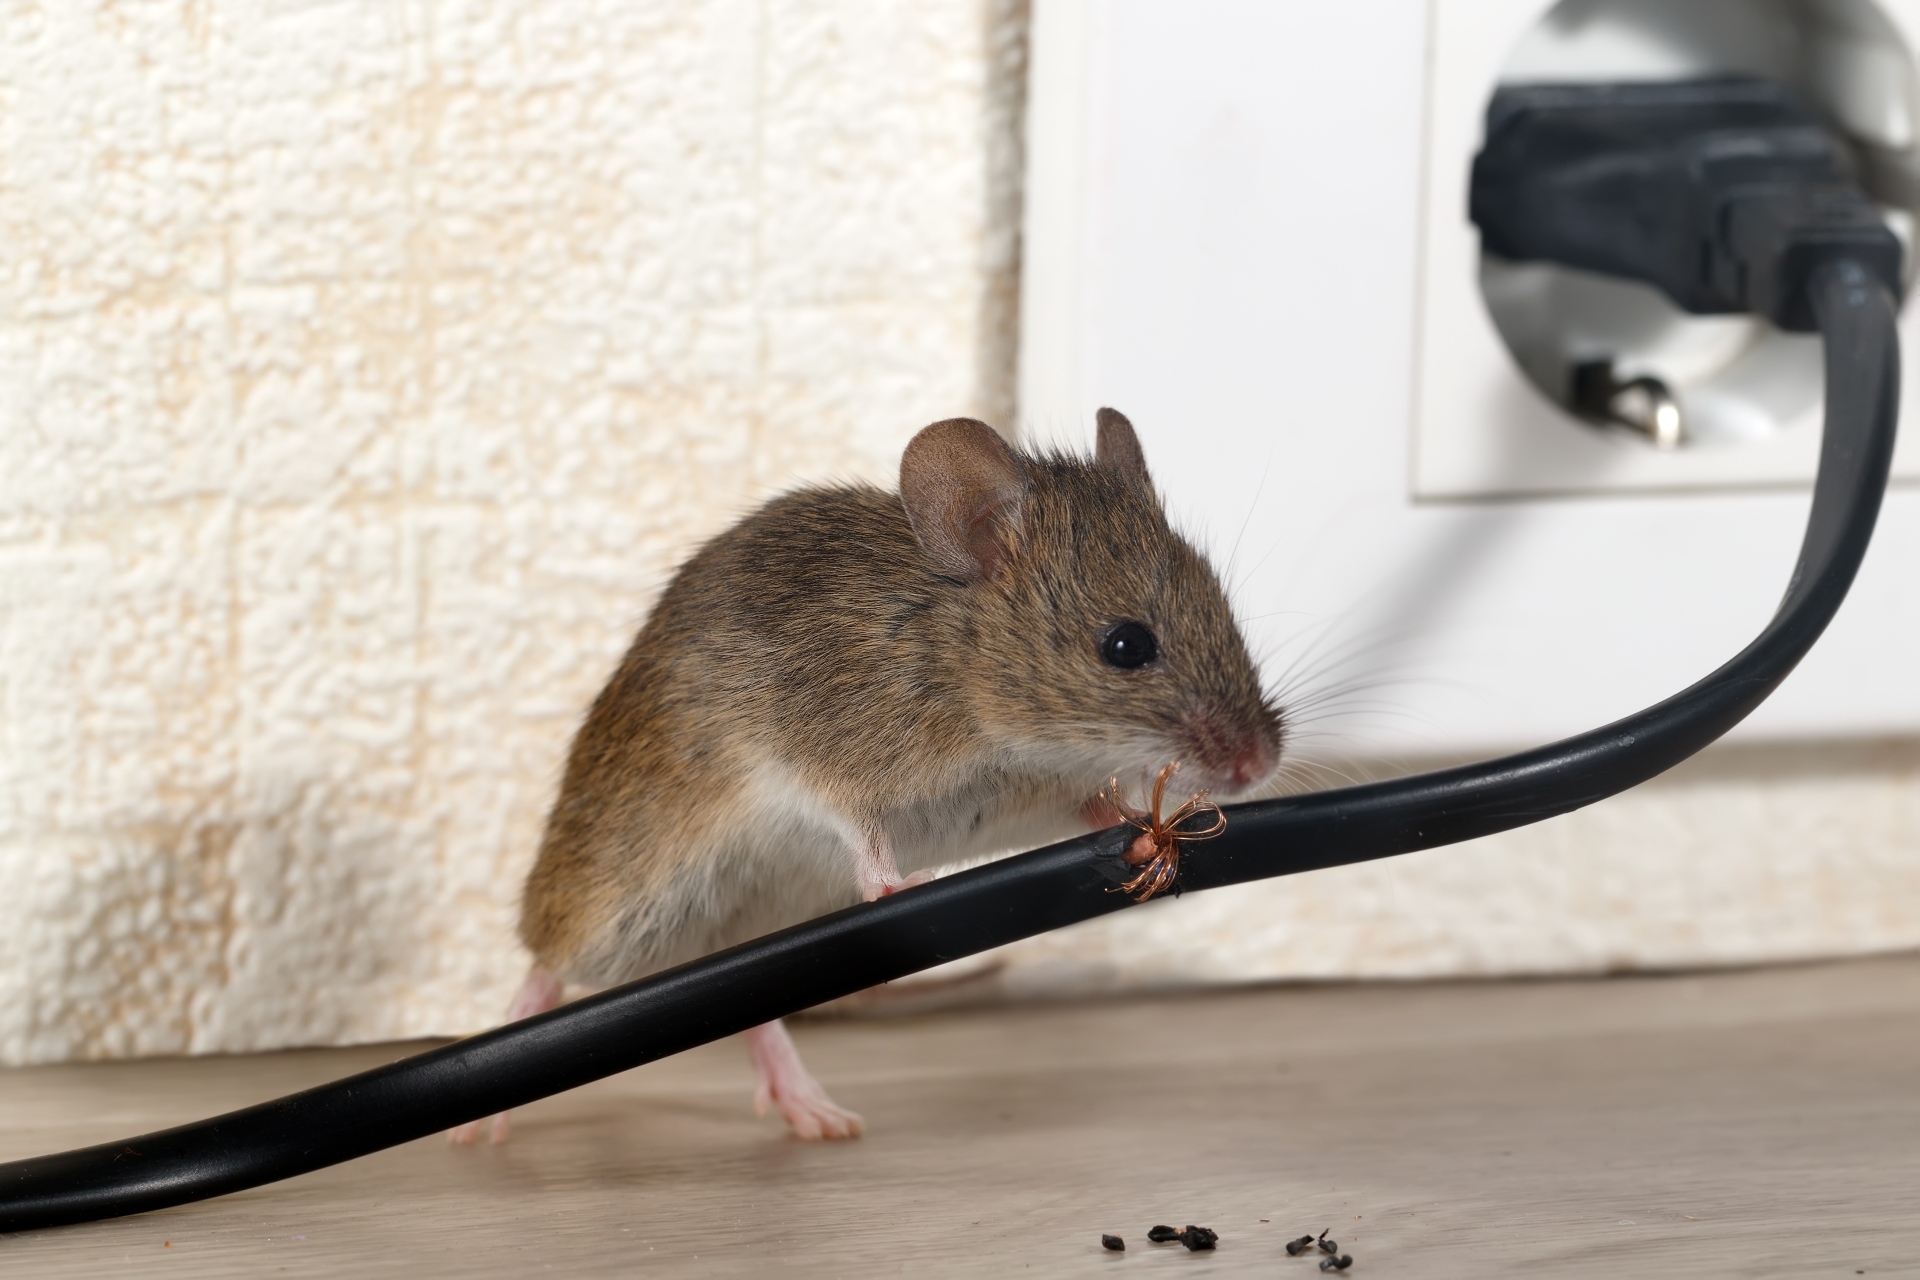 Mice Infestation, Pest Control in Greenhithe, DA9. Call Now 020 8166 9746